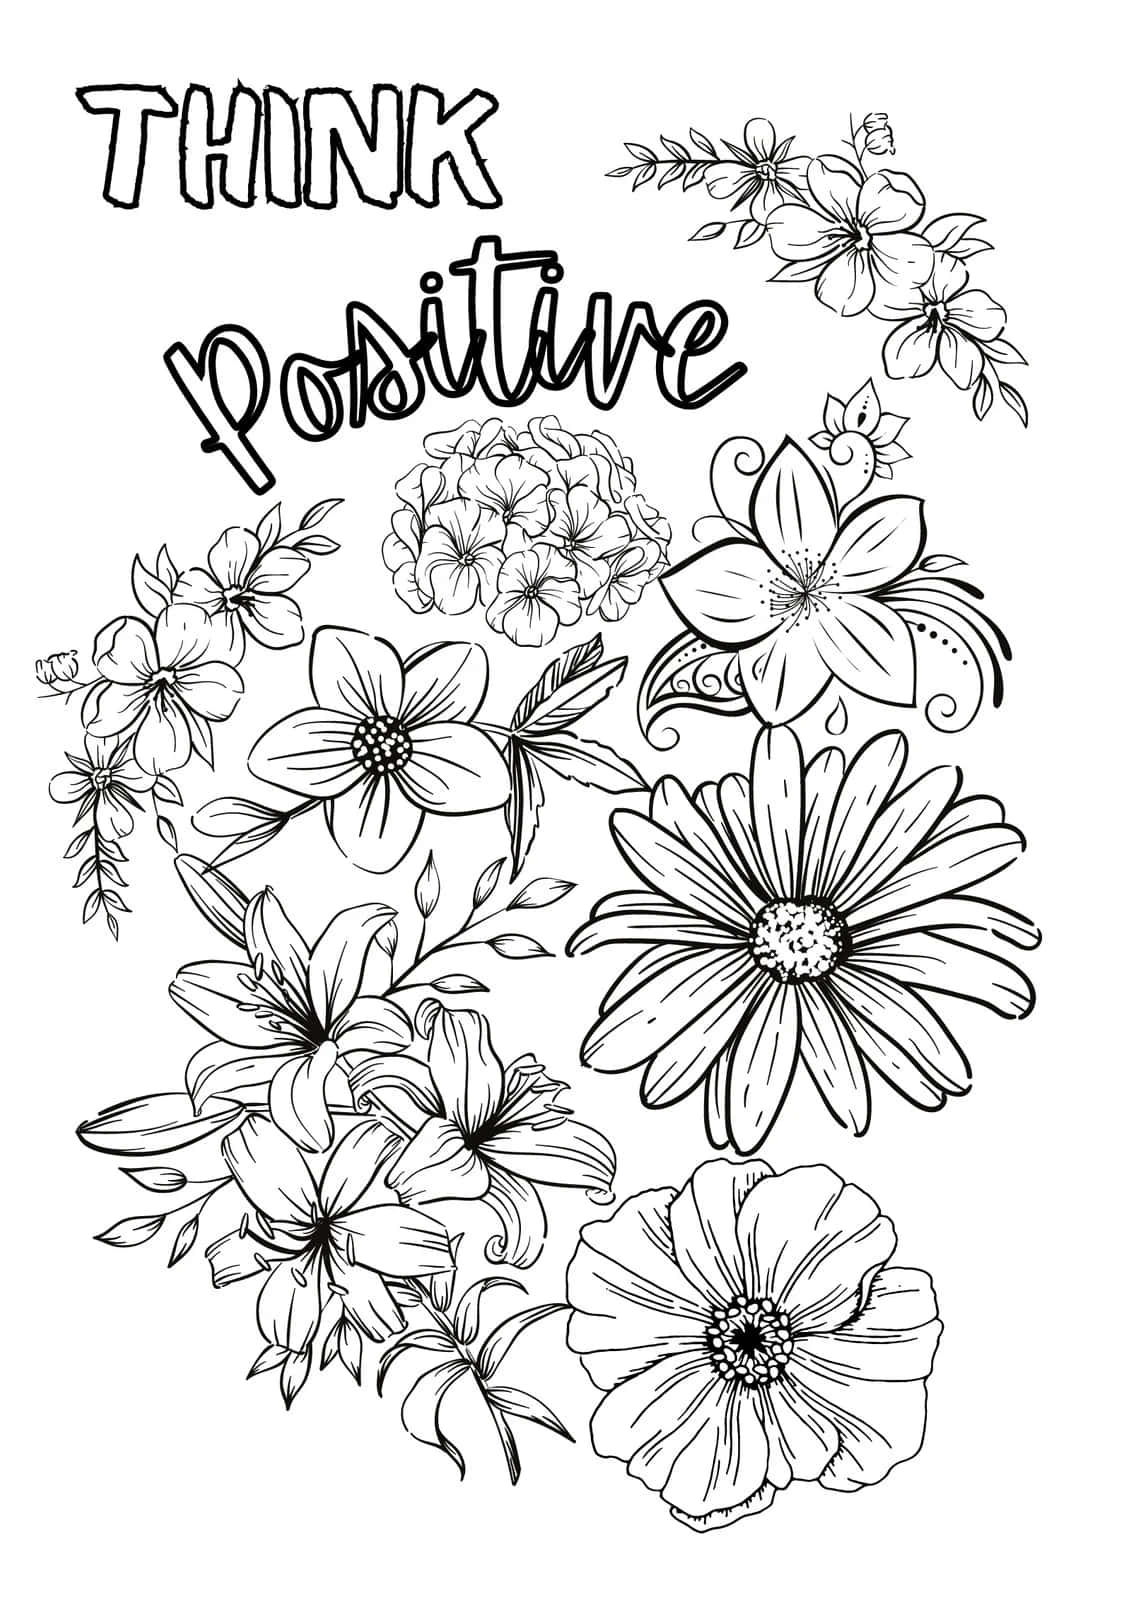 Brighten up your day with these vibrant flower coloring pages.